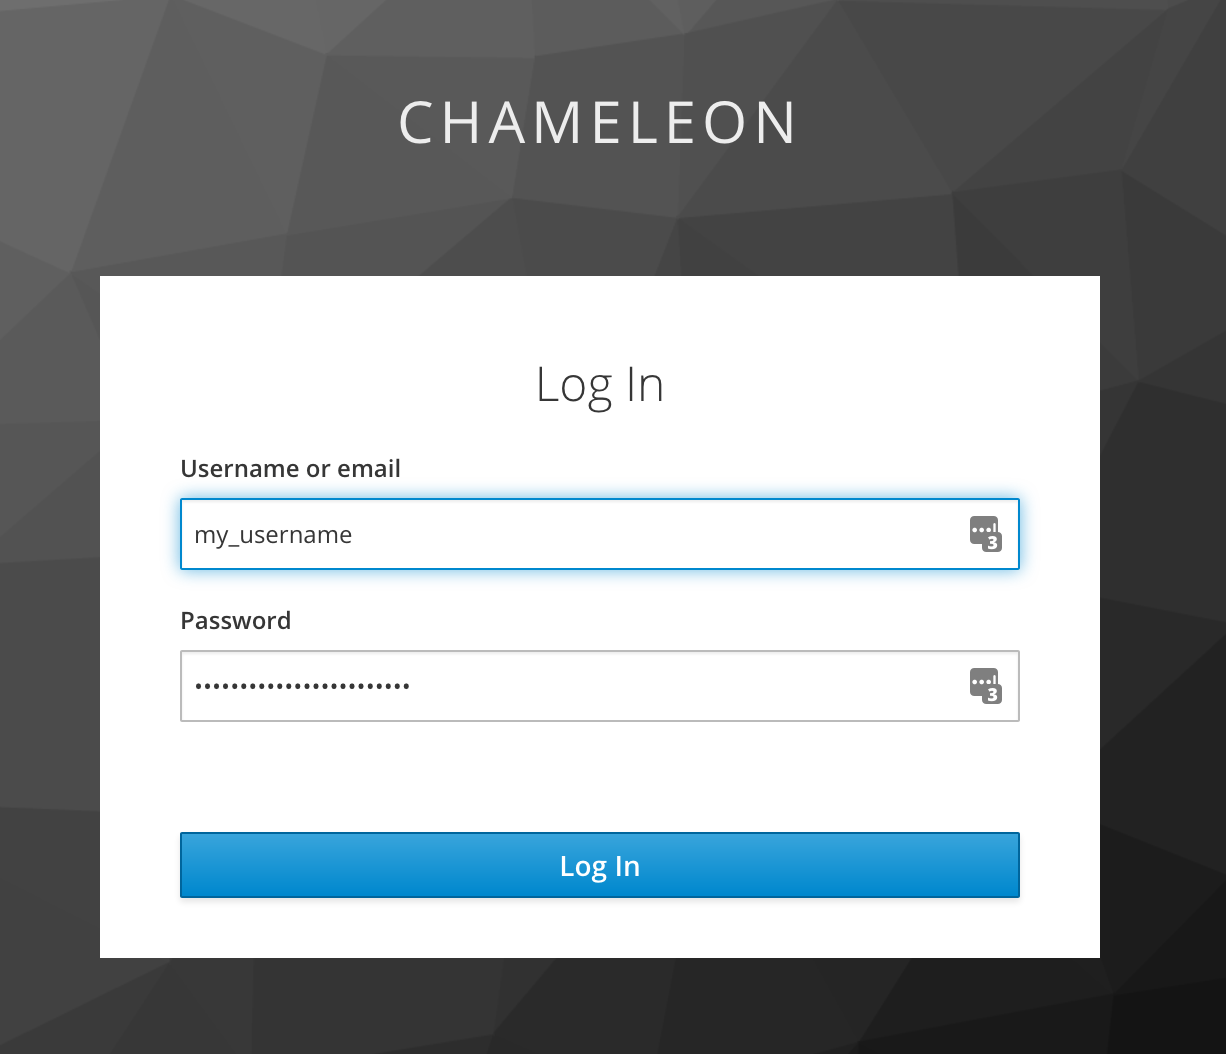 Sign in to identity management with your Chameleon credentials